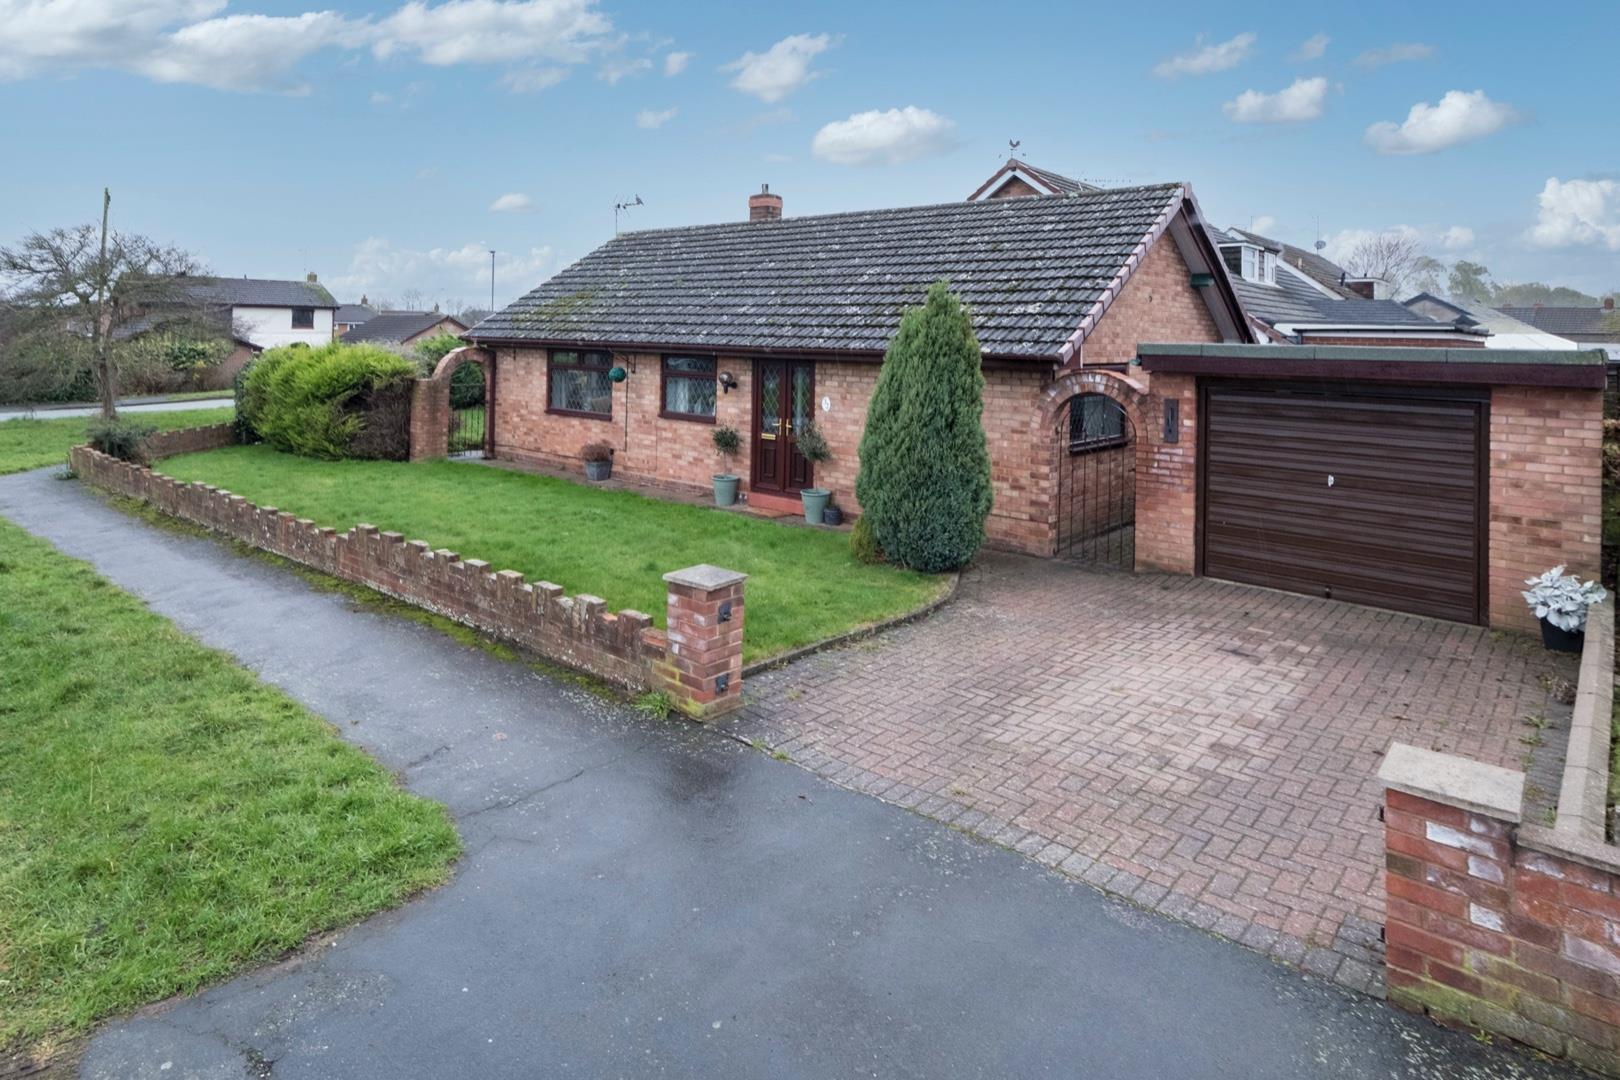 3 bedroom  Detached Bungalow for Sale in Great Boughton